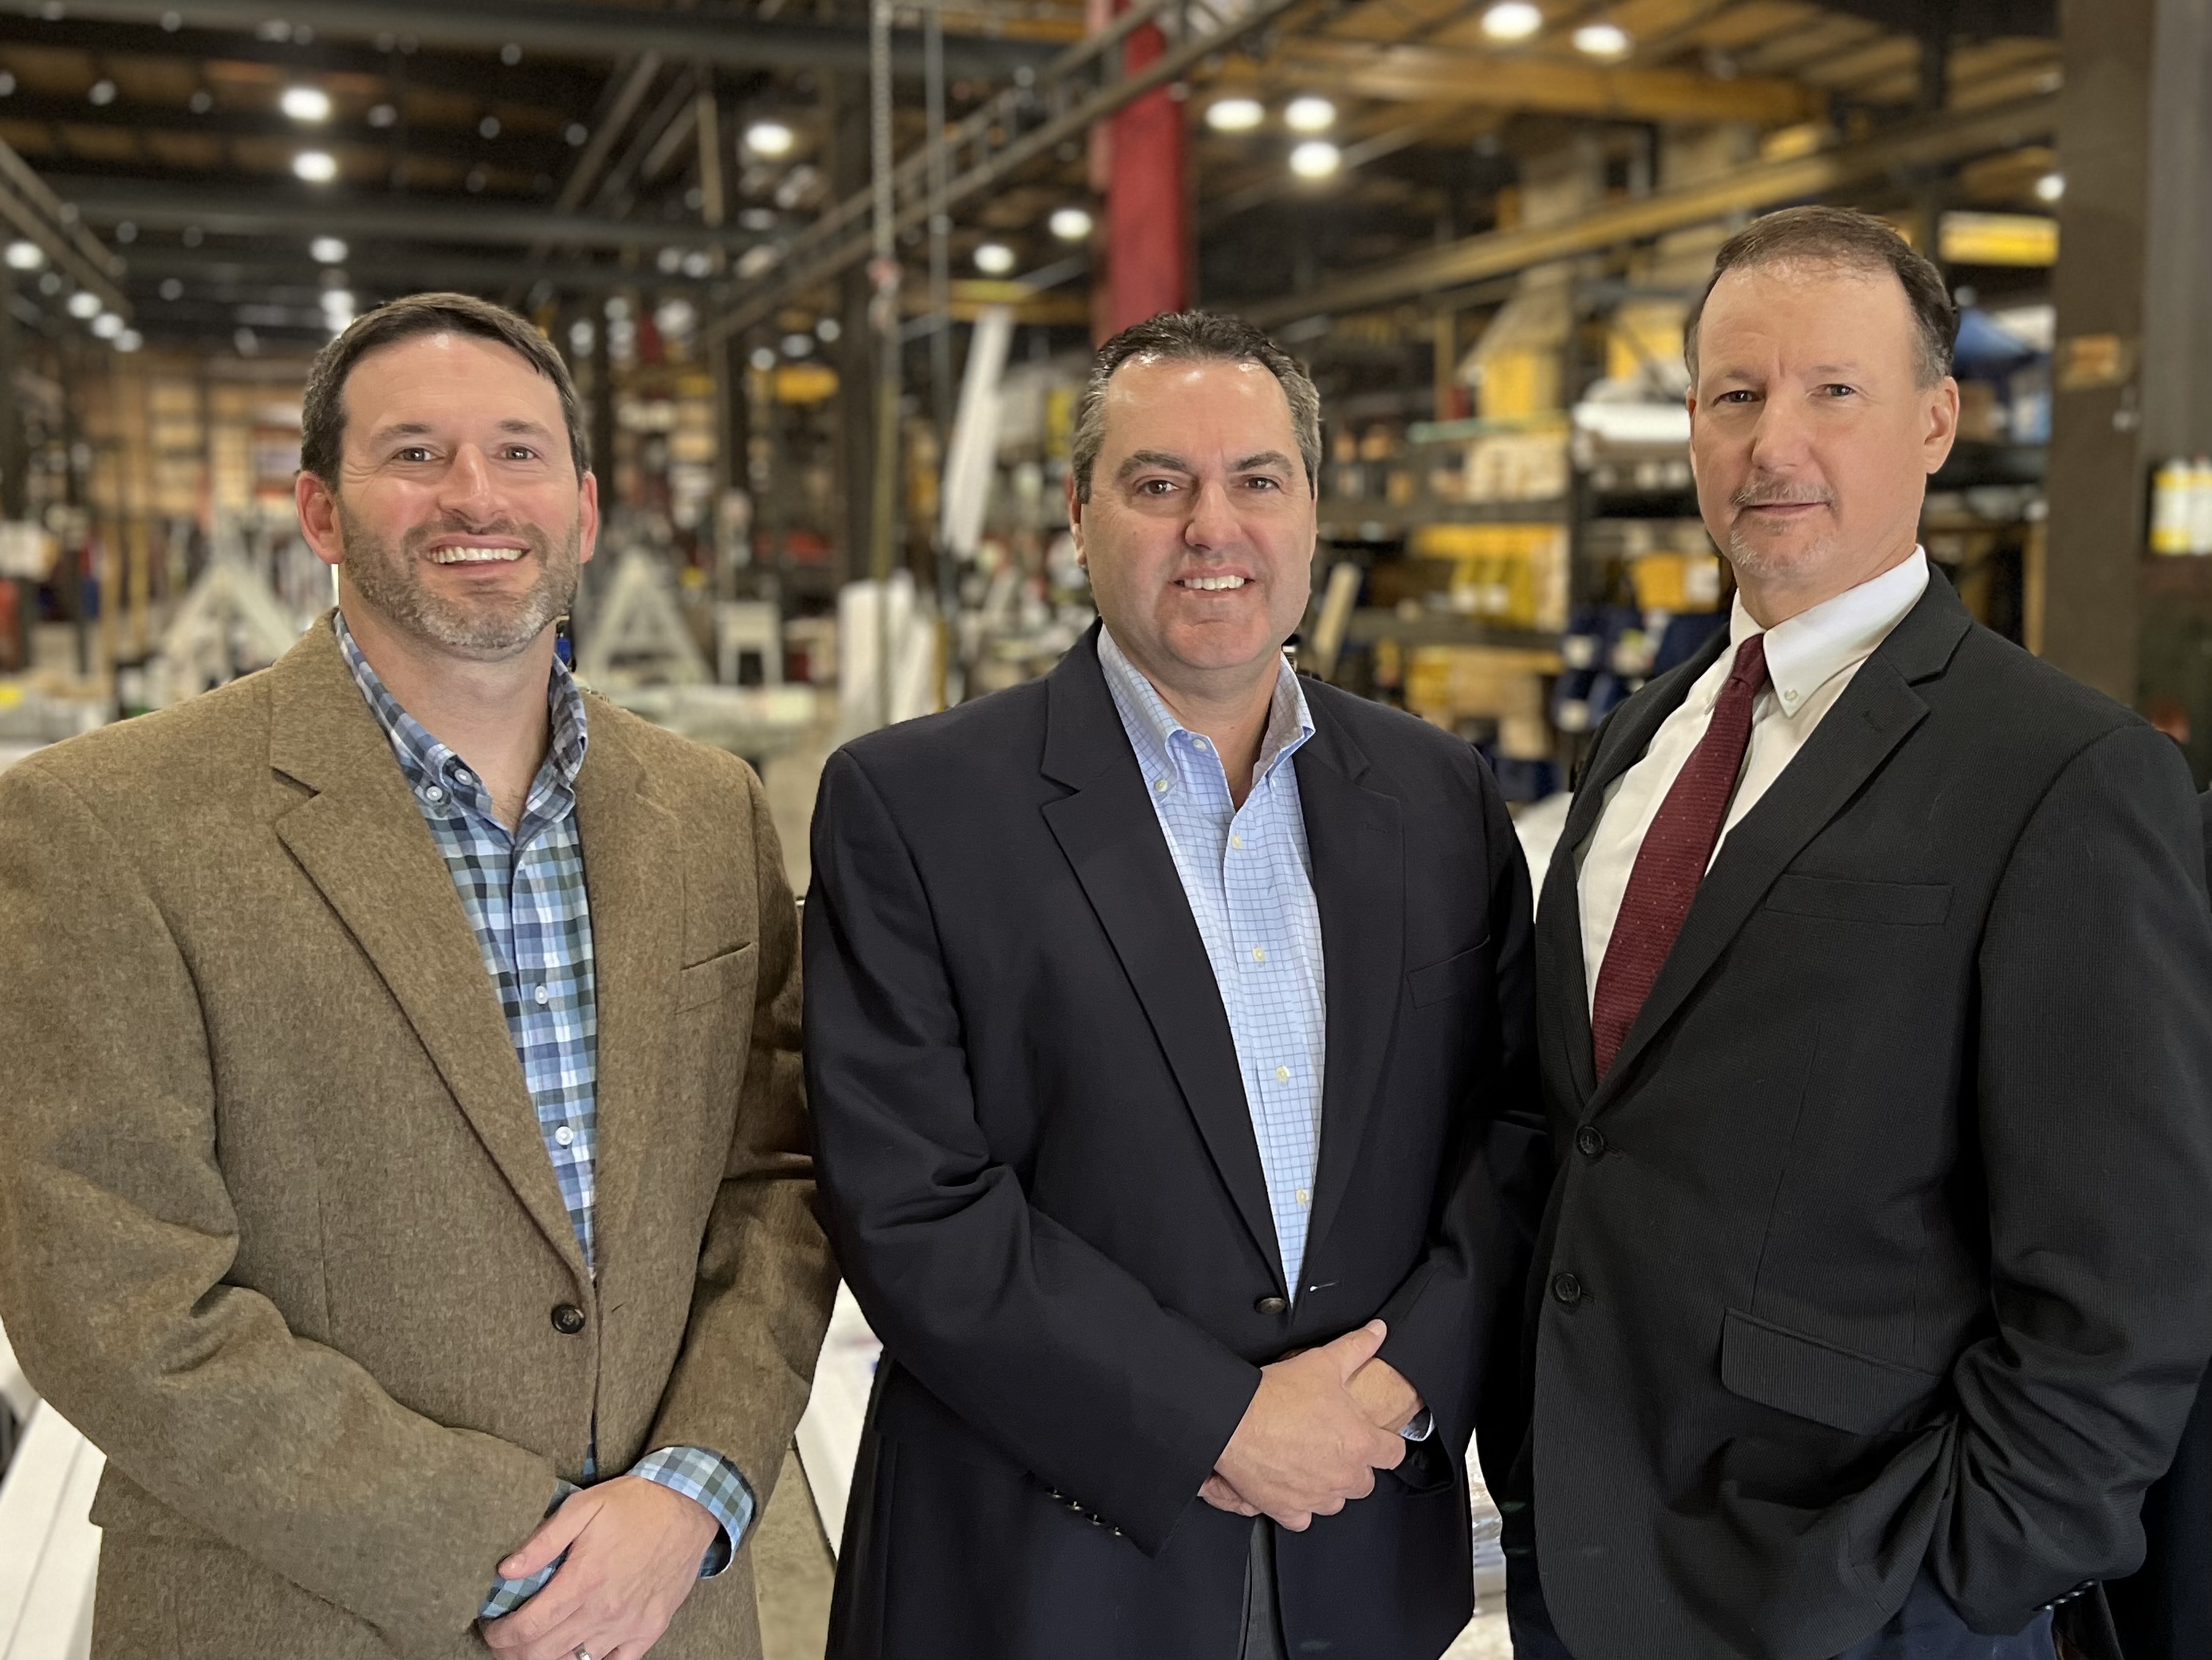 Promise to Perform Industries, Inc. Announces Acquisition of Transol Corporation and Their Subsidiaries - Spanco, Inc., Rigid Lifelines and Lug-All Corporation